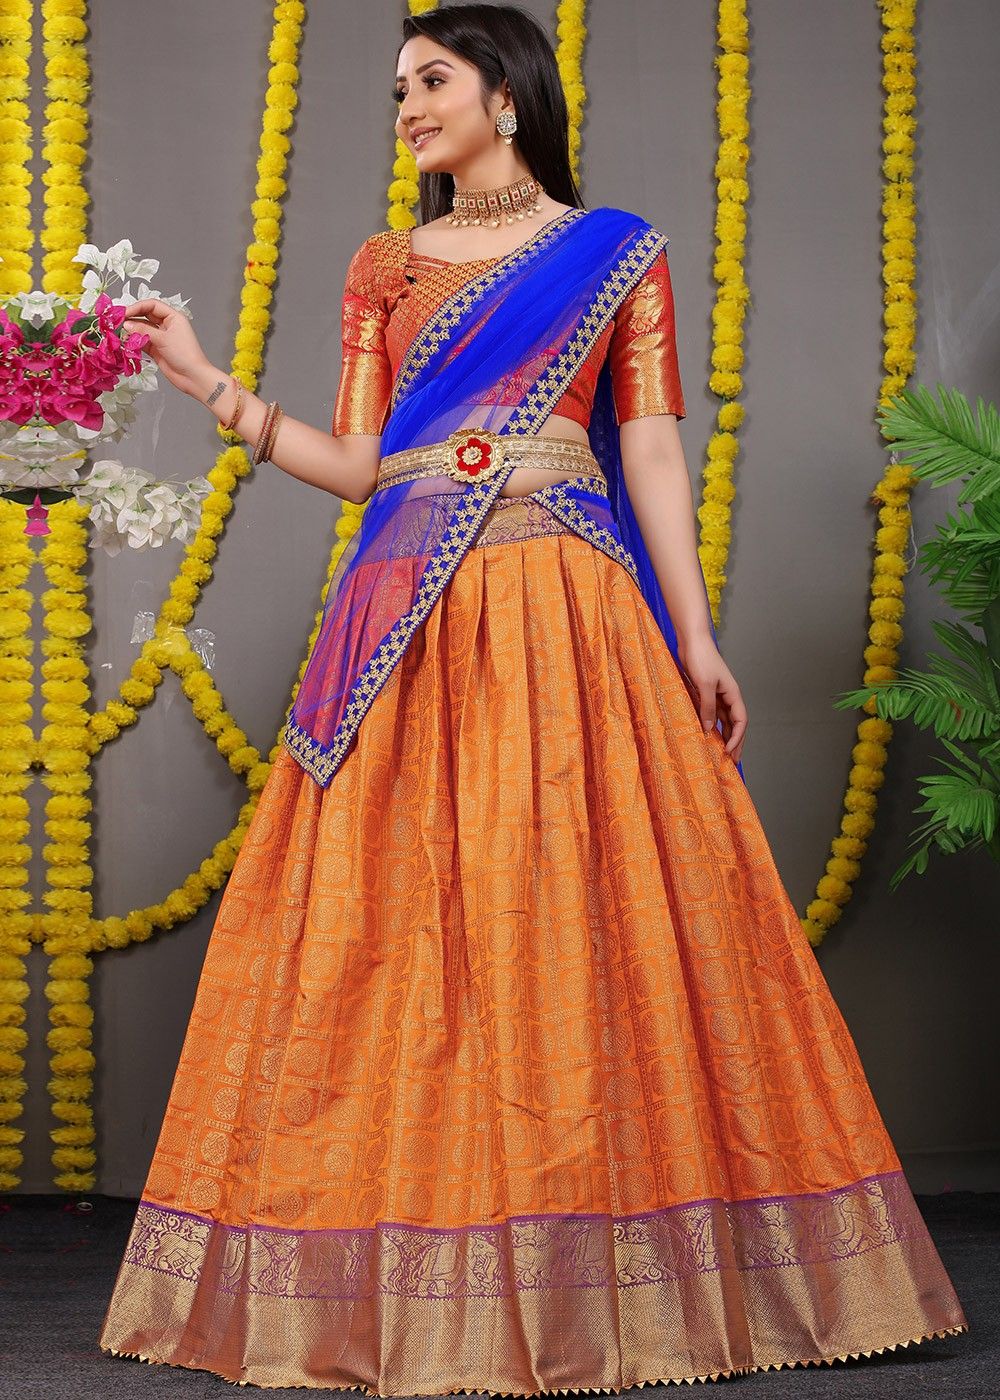 Stunning orange and bottle green color combination pattu langa voni. Blouse  with hand embroidery zardosi work.